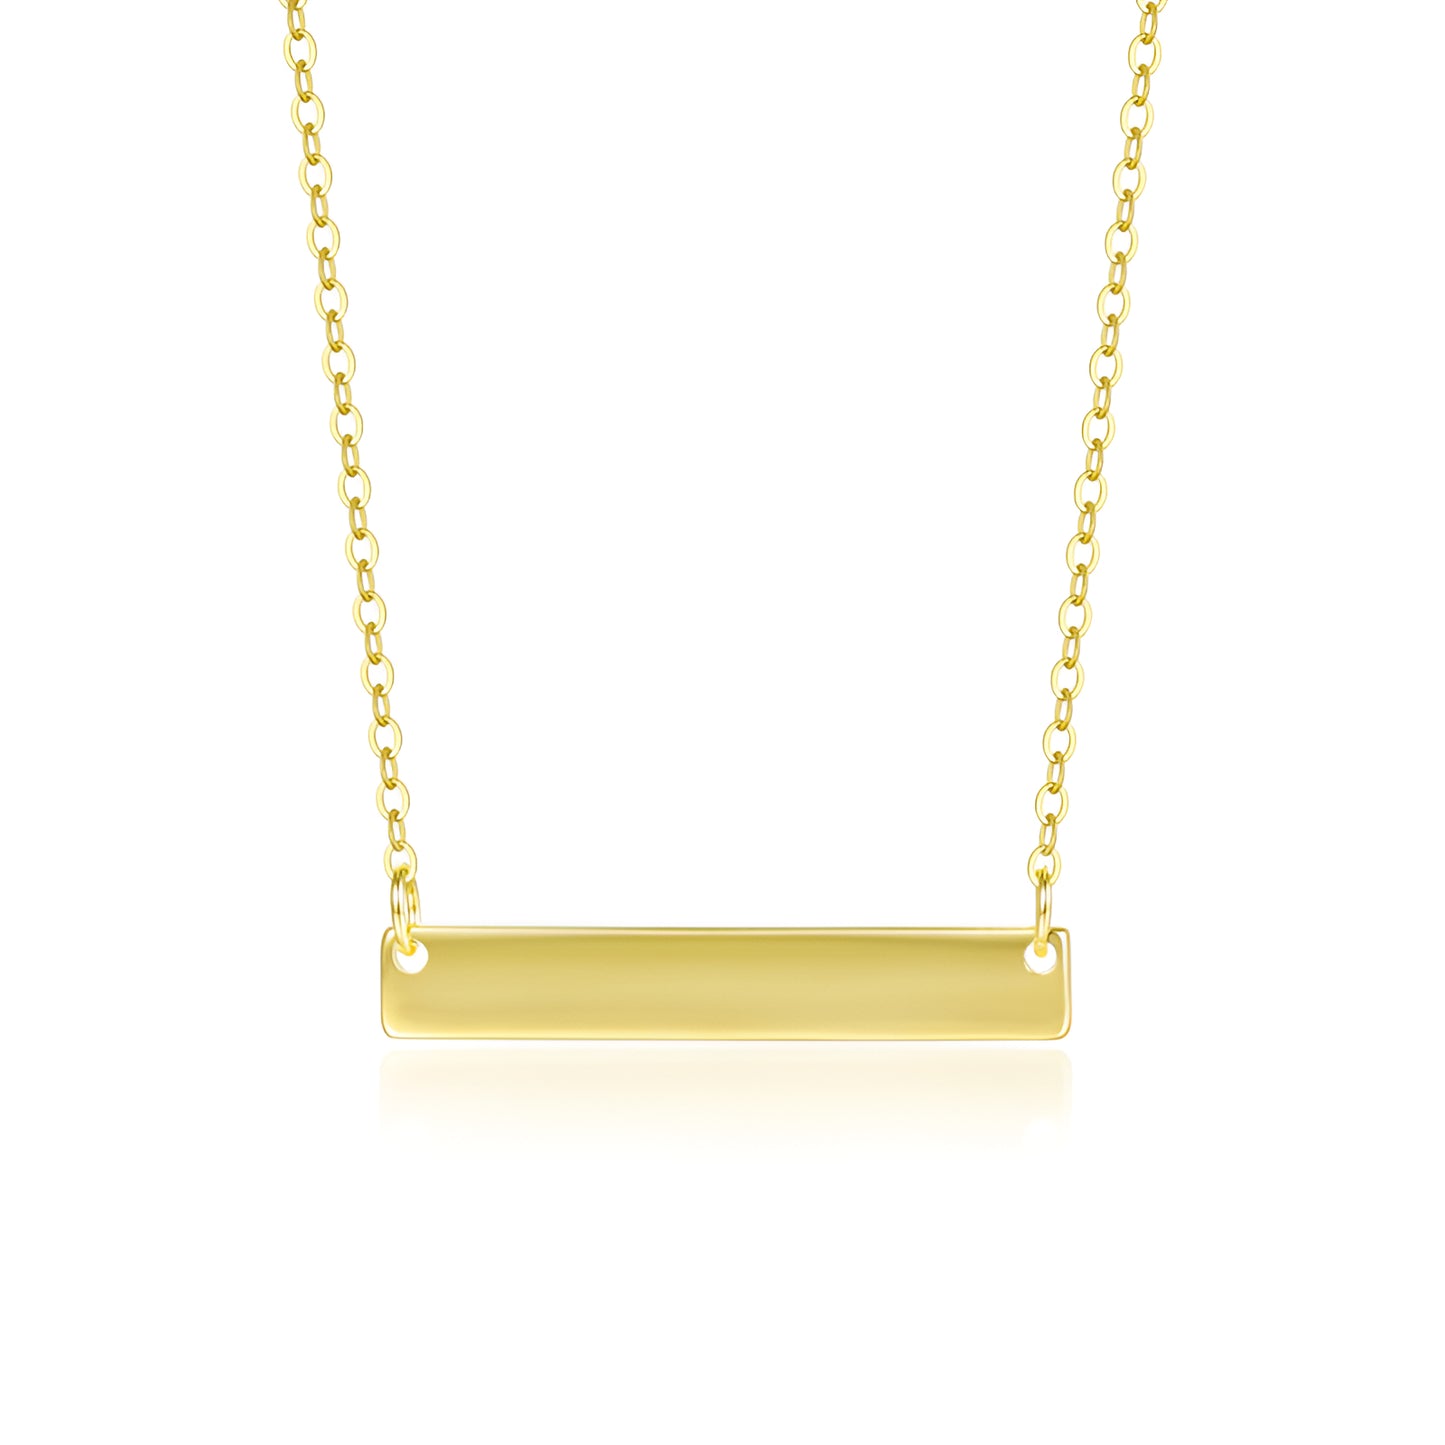 Horizon Bar Necklace - Silver or 18ct Gold Plated